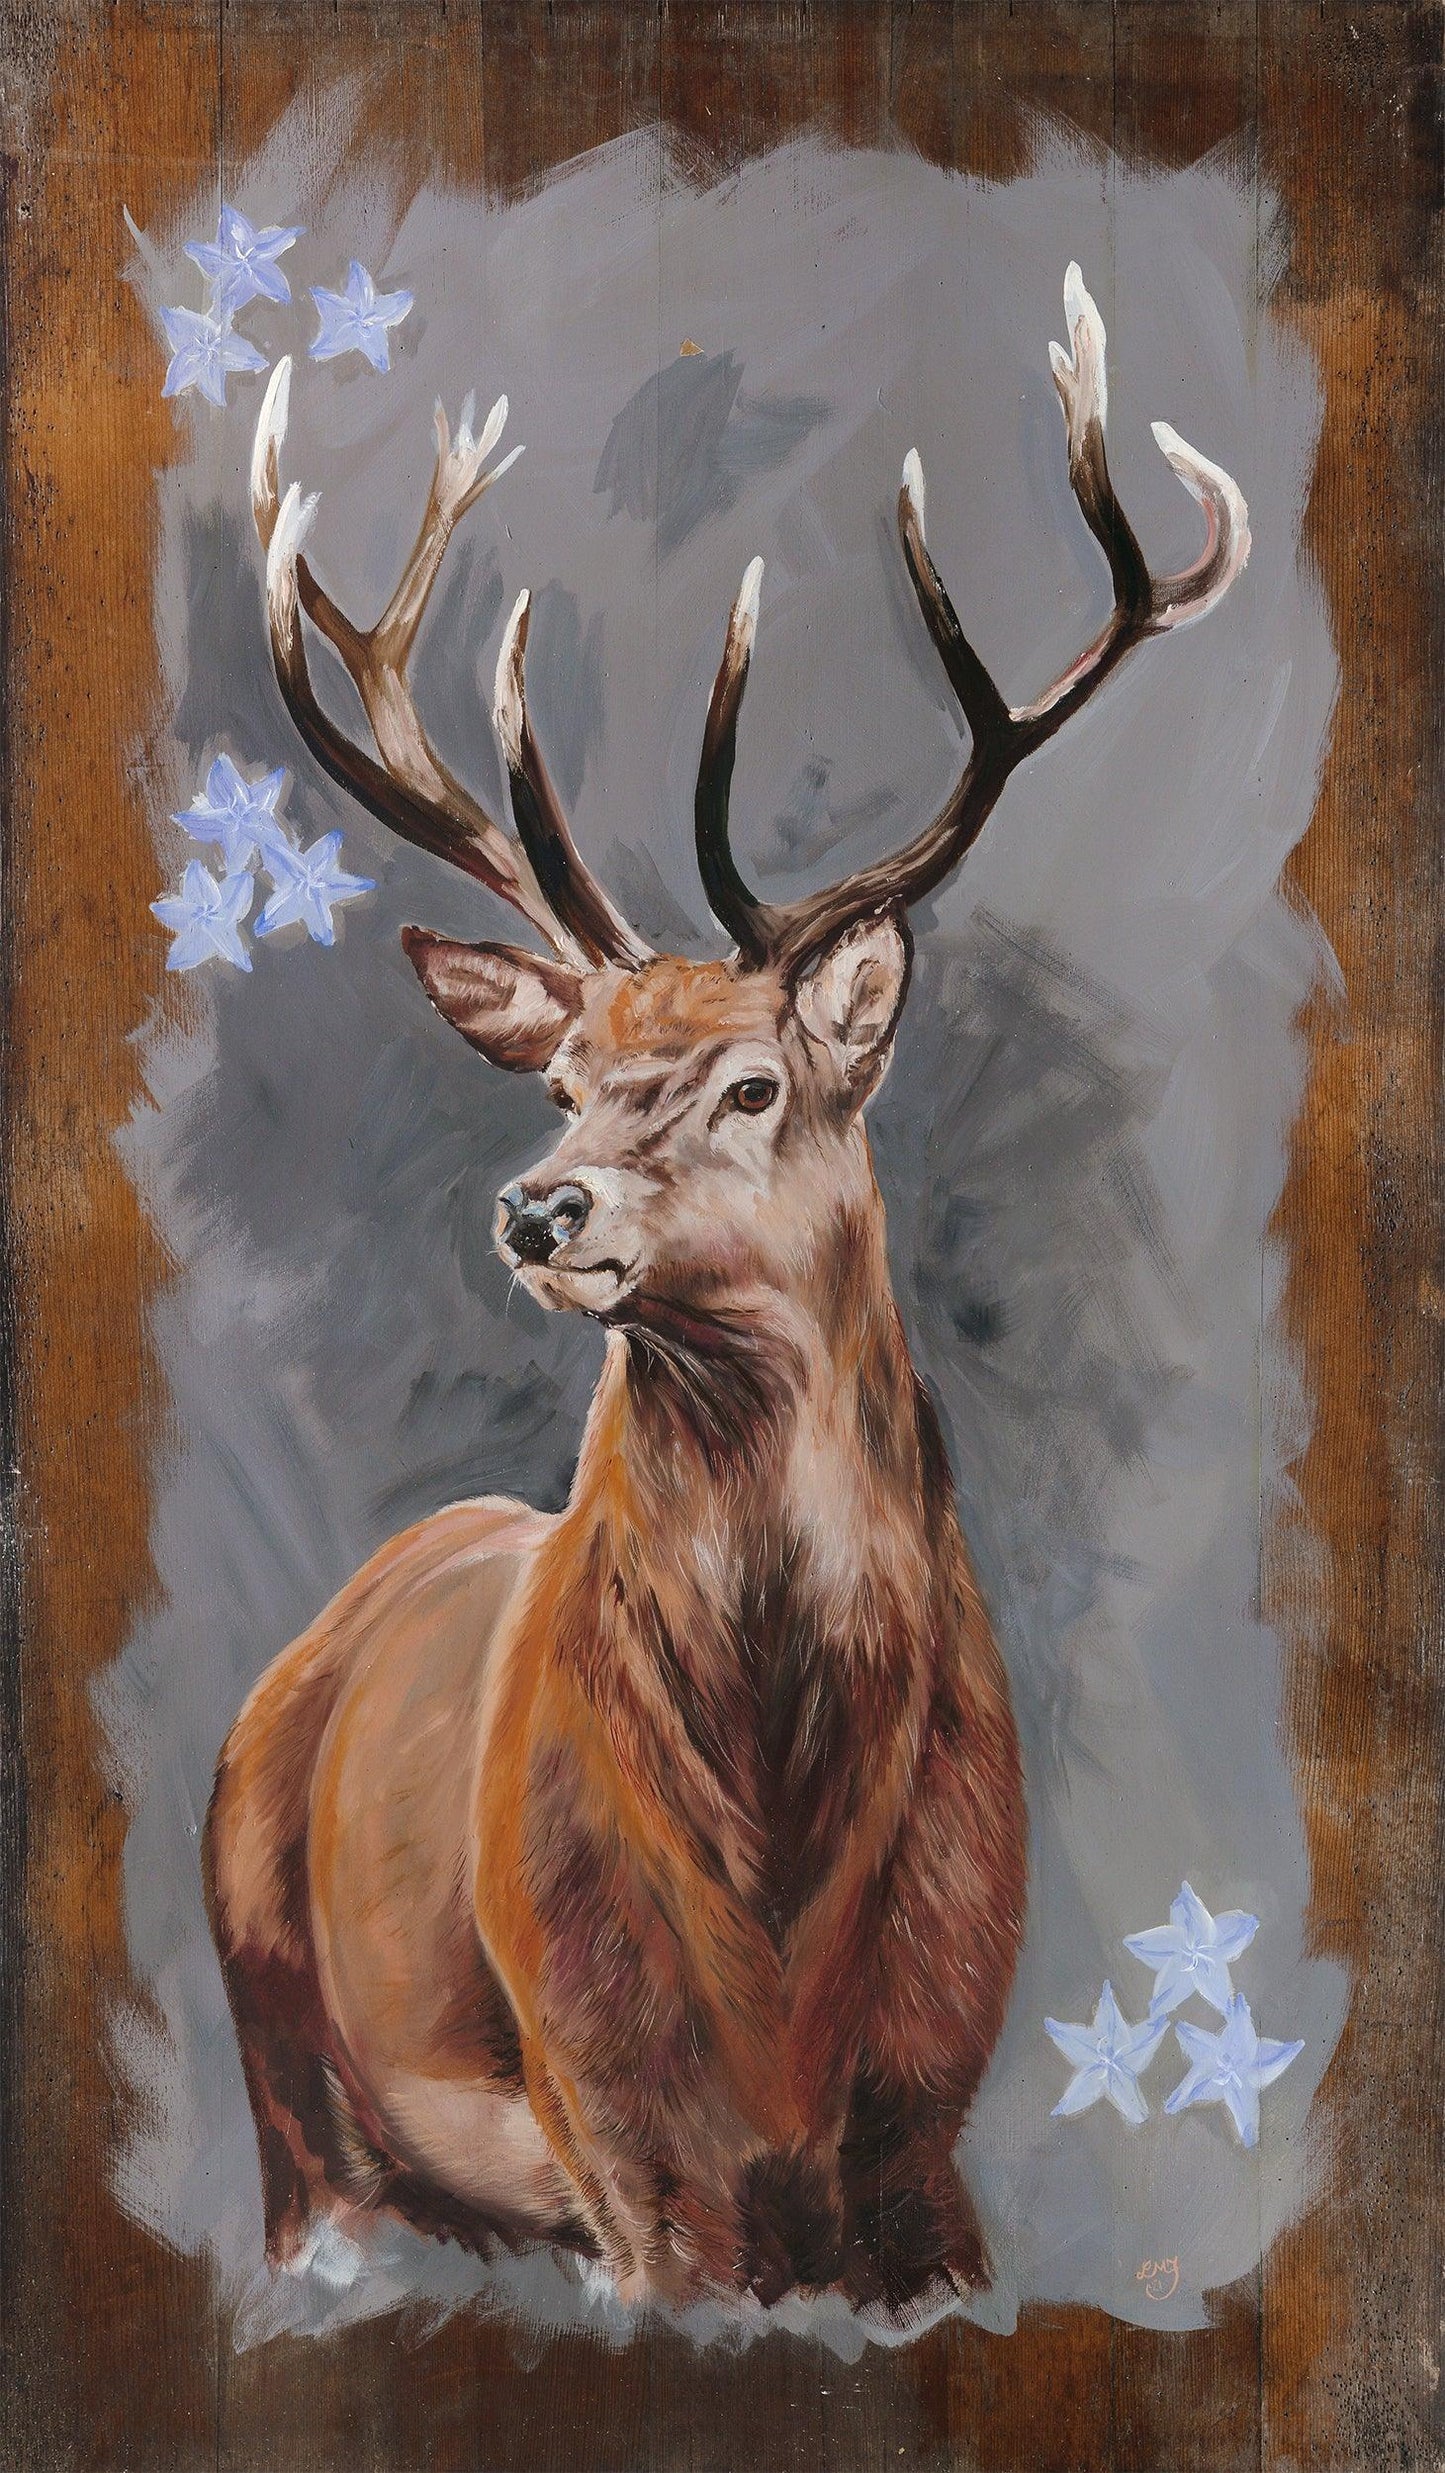 Majestic Stag artwork - oil painting on wood - lorrainefield